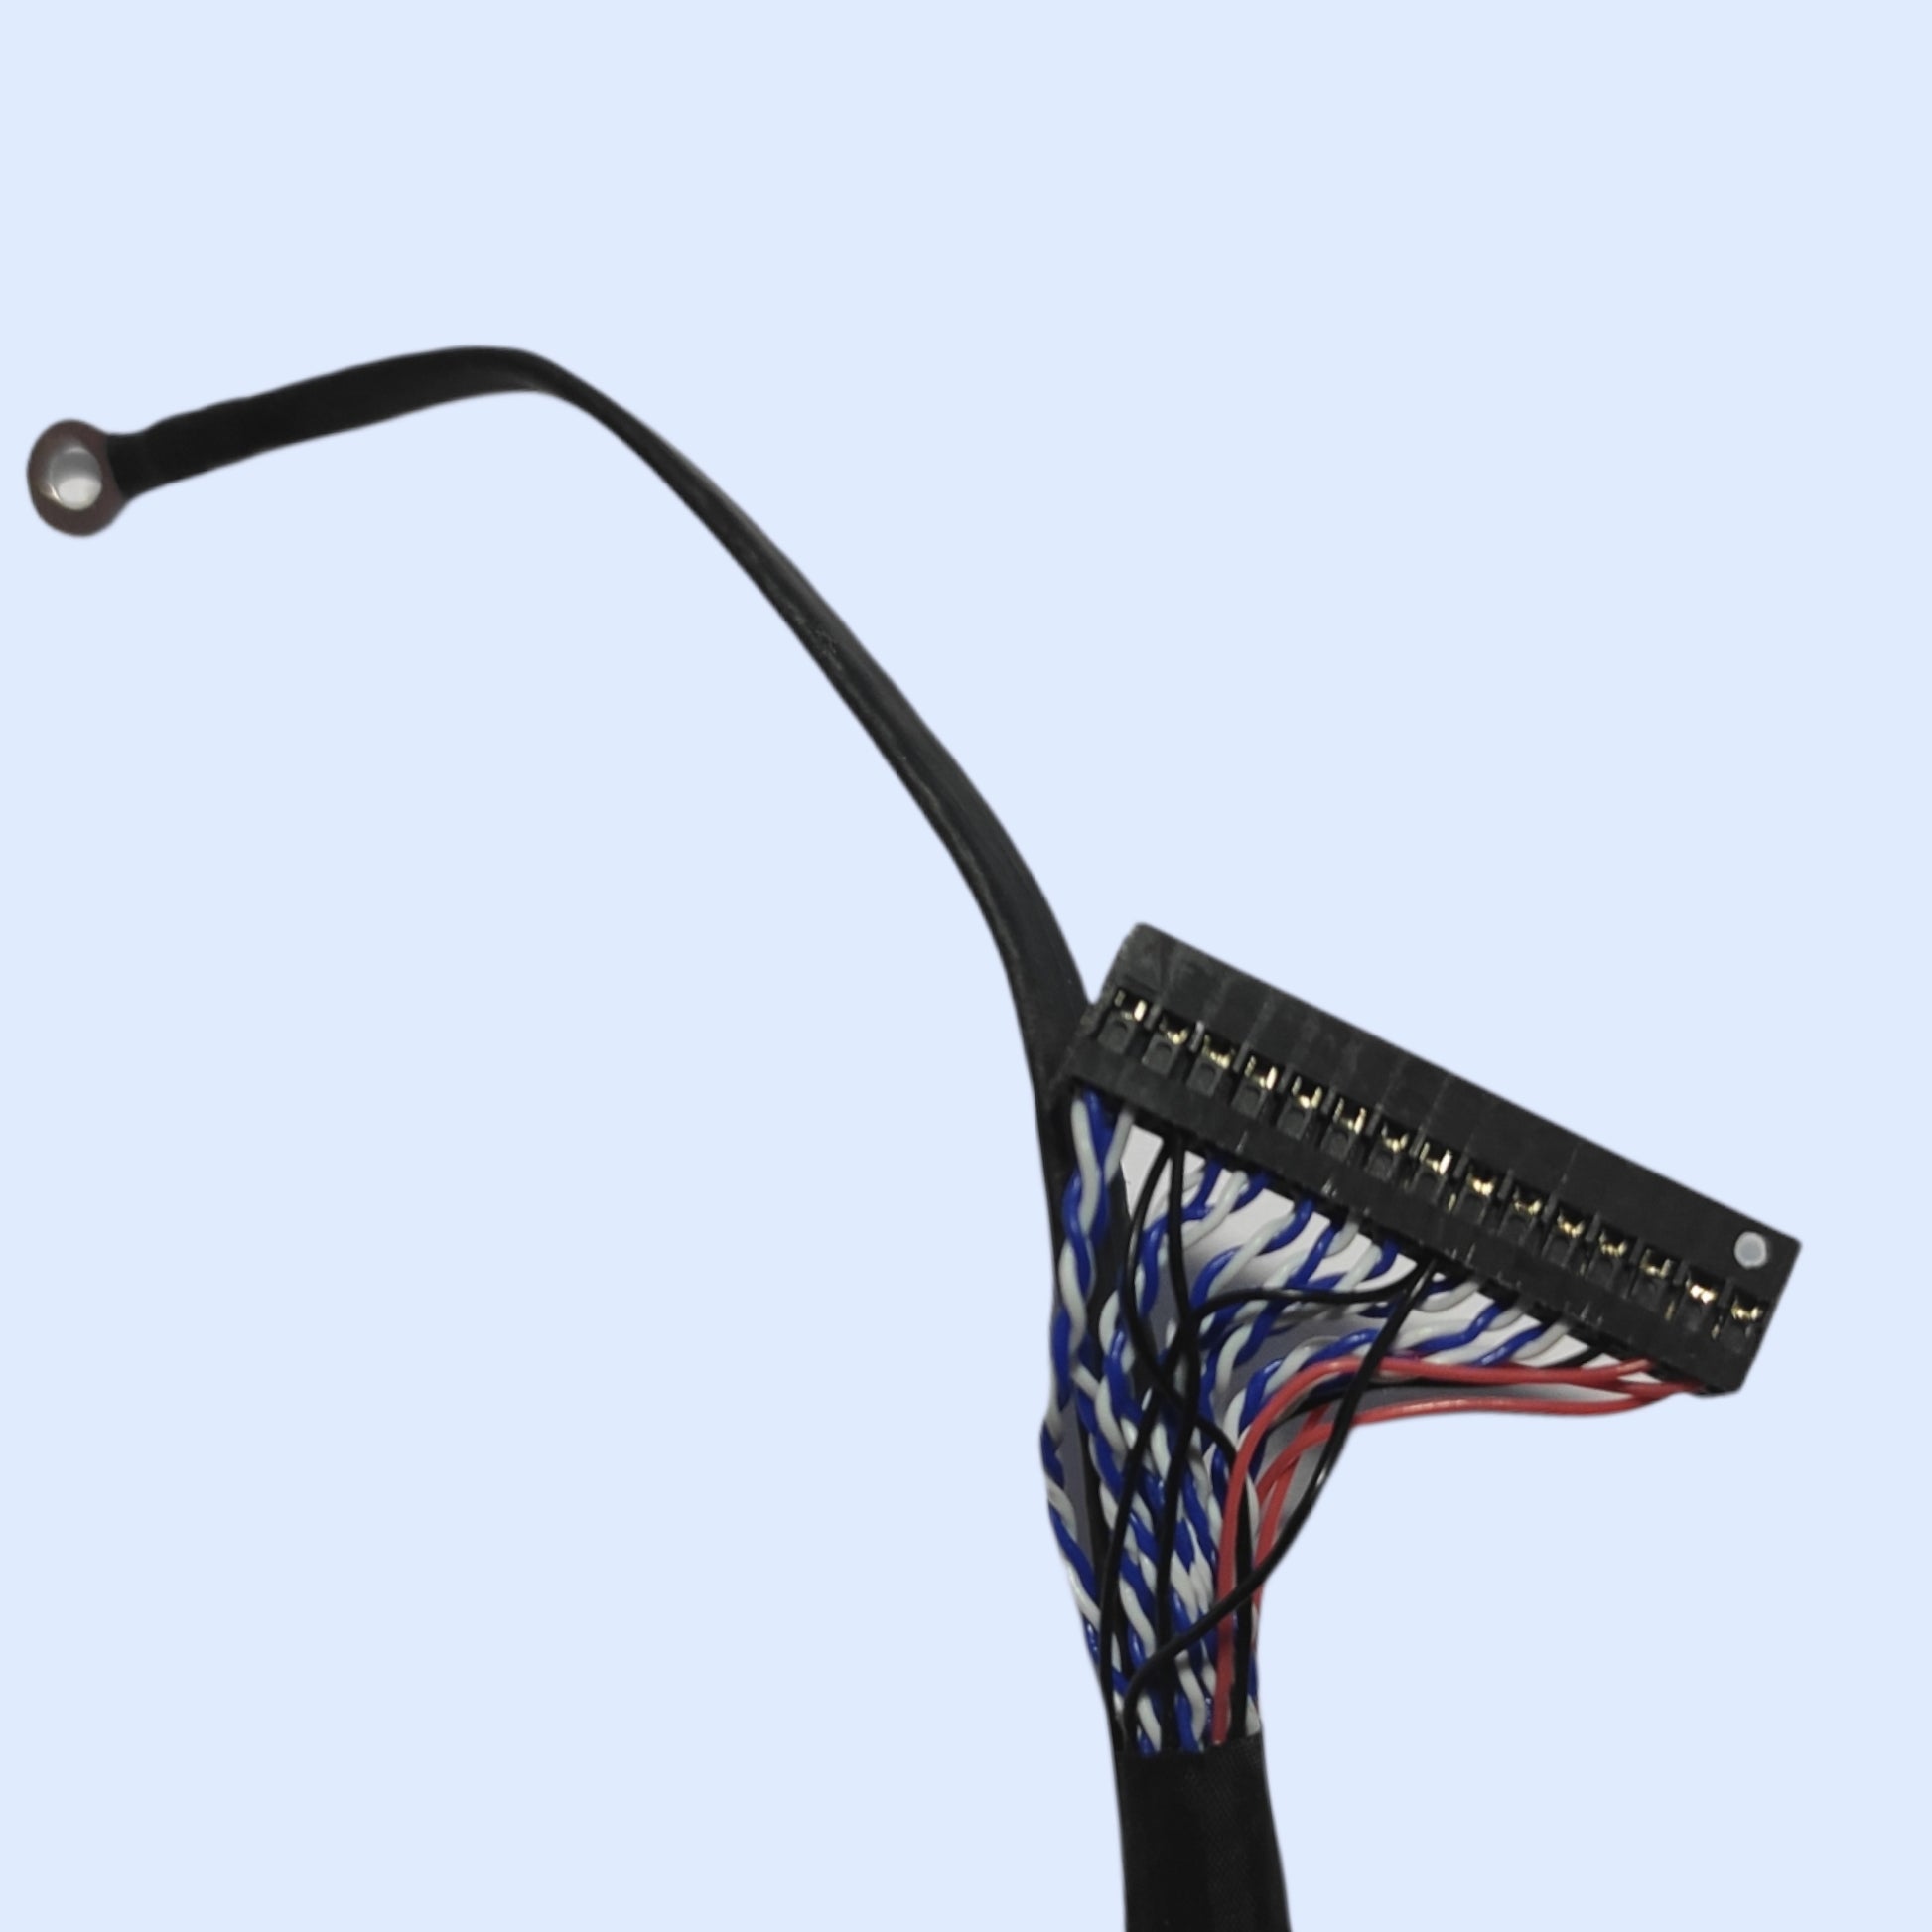 LVDS Cable 05 - Faritha